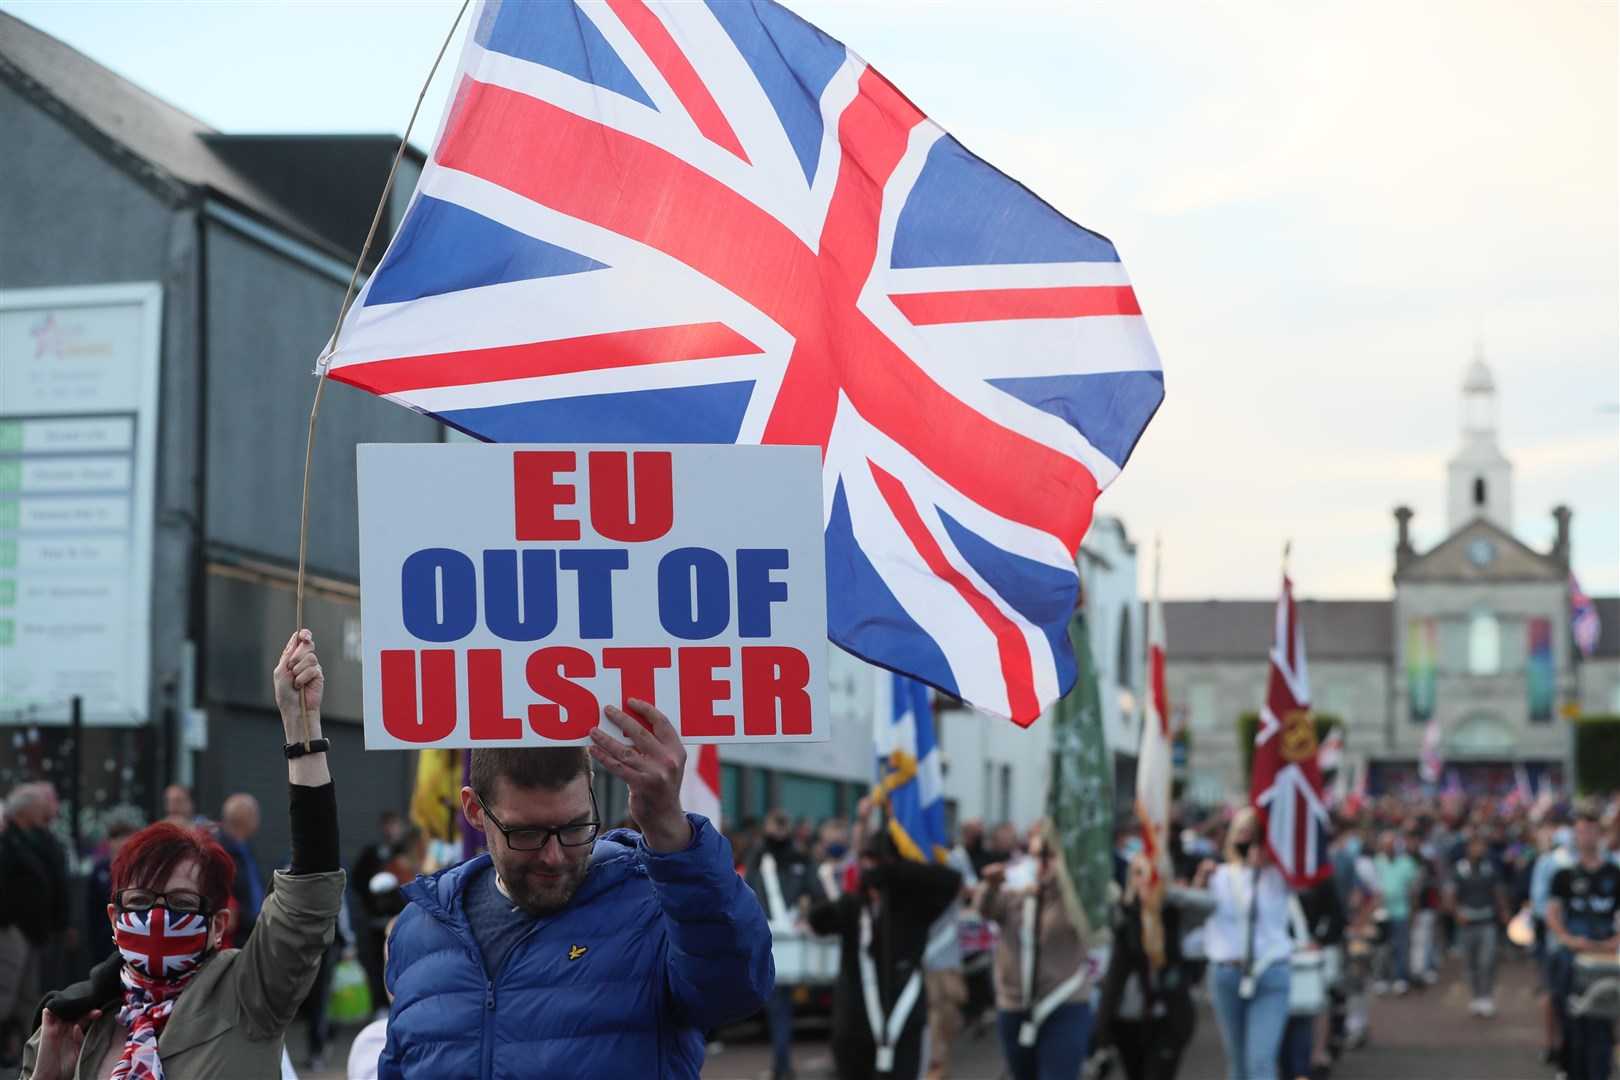 People take part in a Loyalist protest in Newtownards, County Down, against the Northern Ireland Protocol (Brian Lawless/PA)